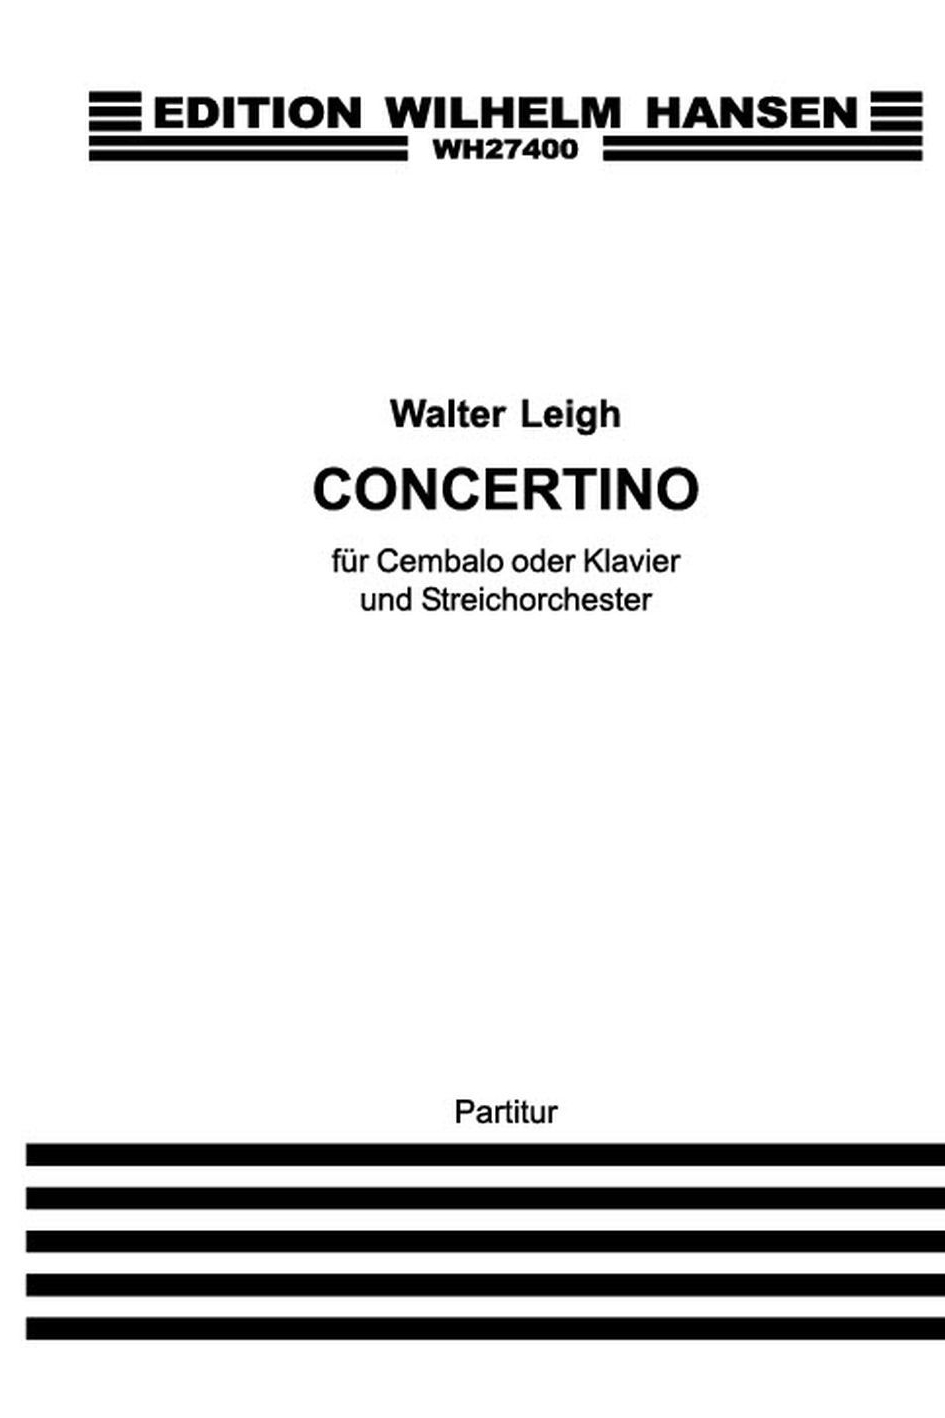 Walter Leigh: Concertino For Harpsichord or Piano (Full Score)